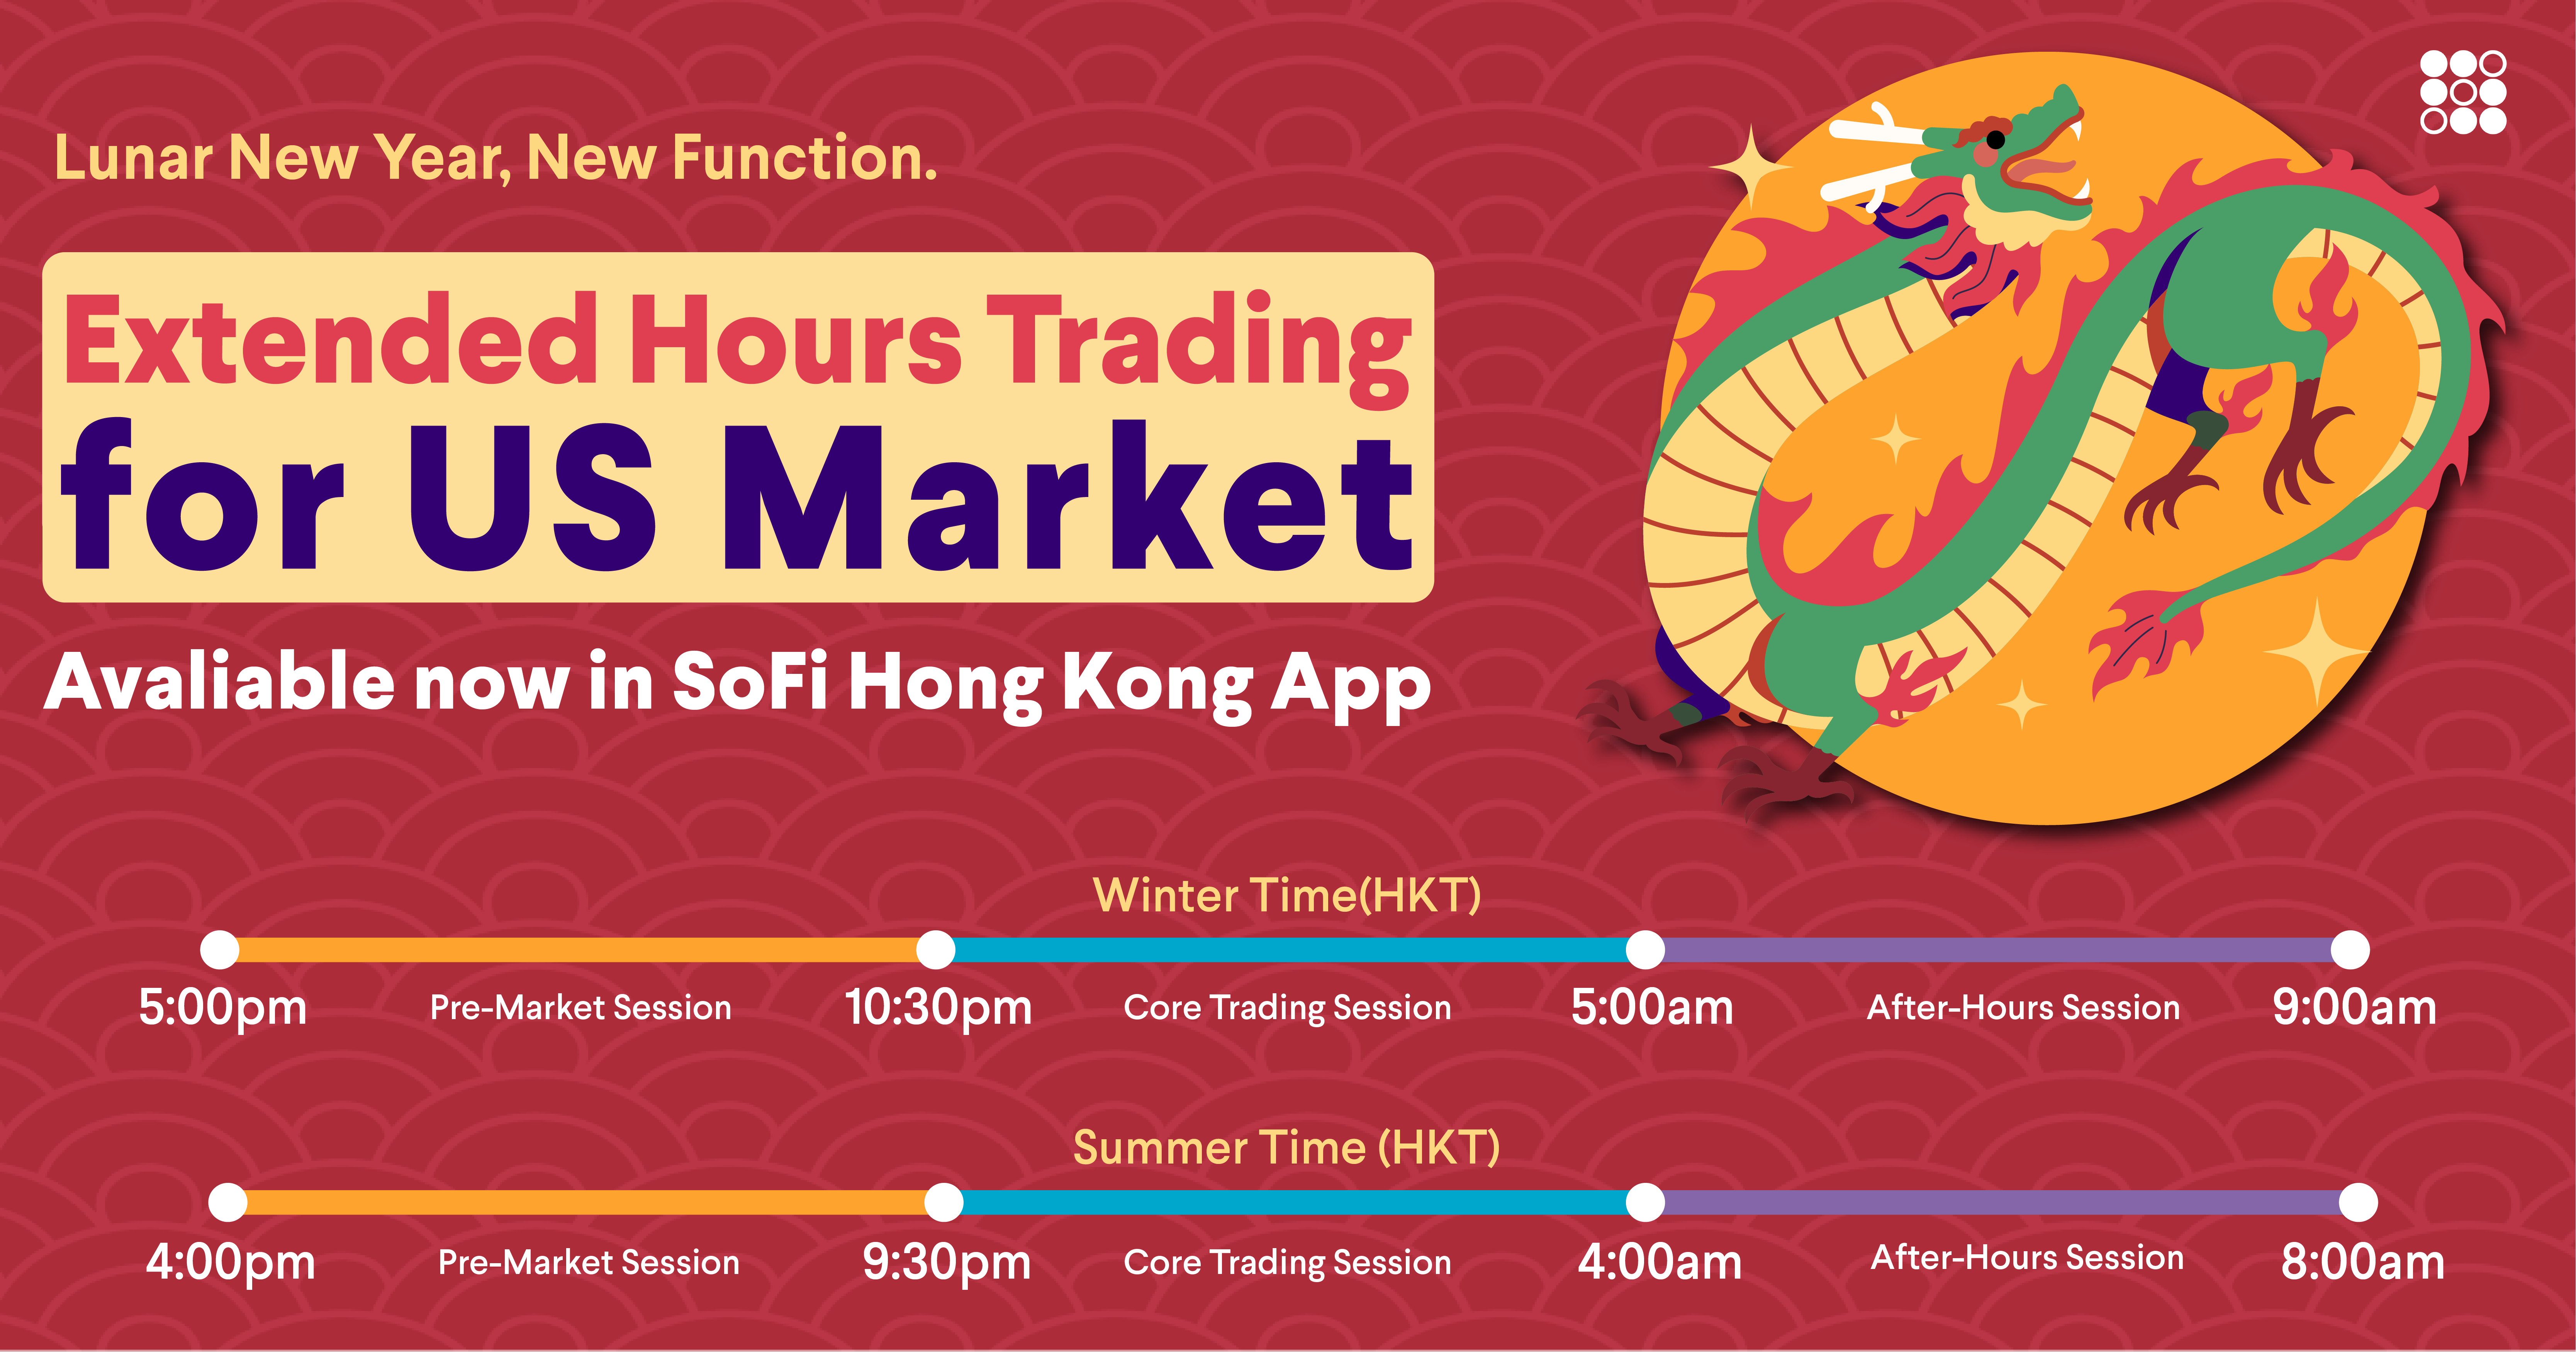 U.S. Extended Hours Trading is now available in  SoFi Hong Kong app